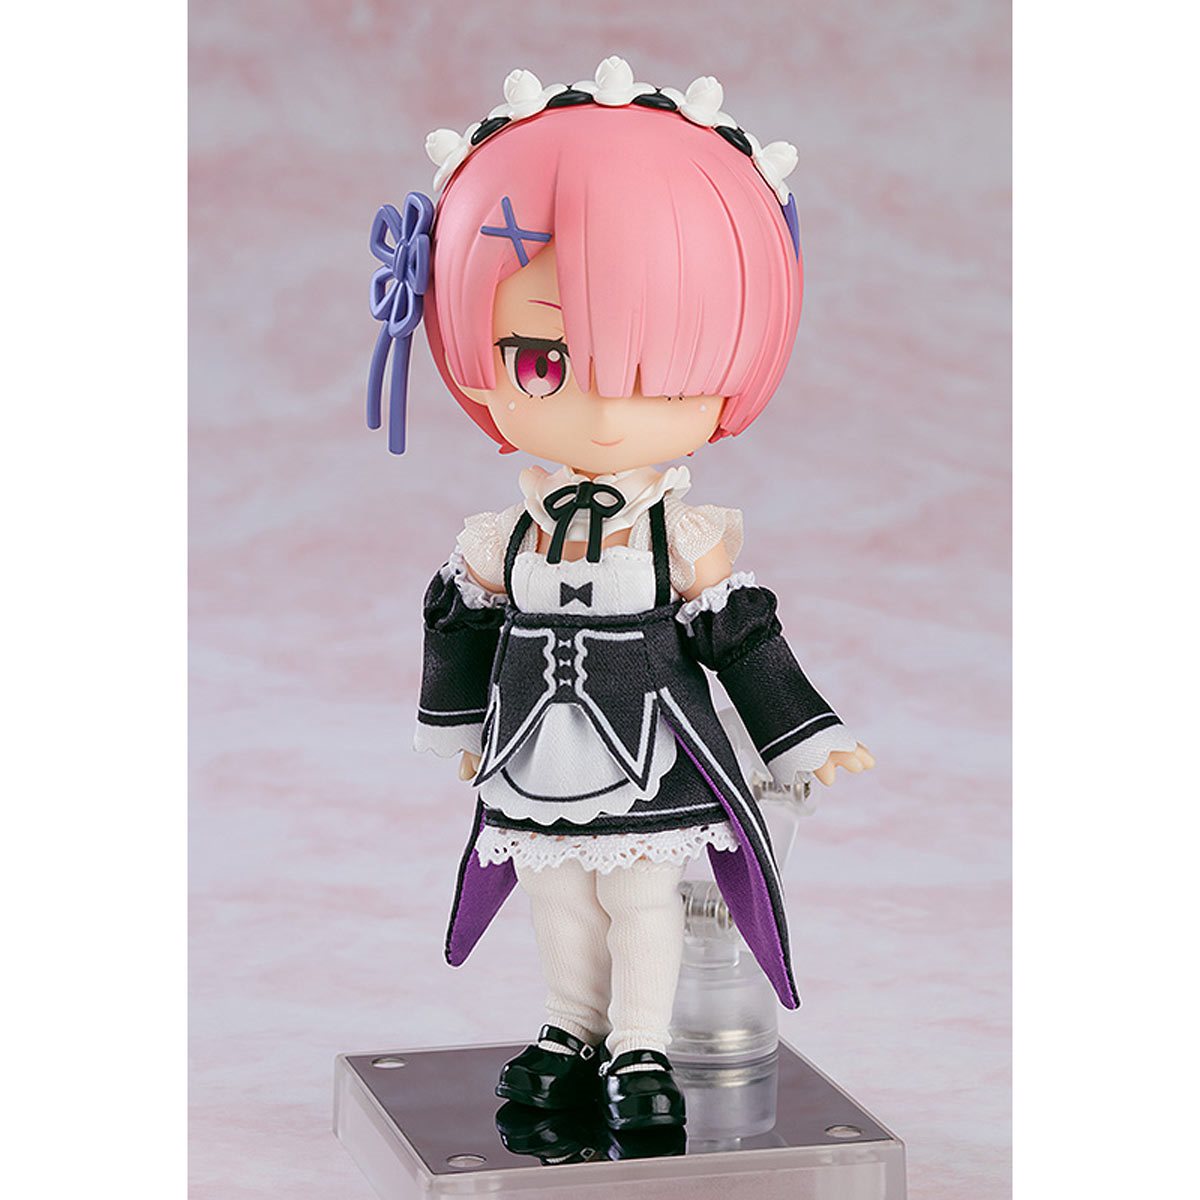 Re:Zero Starting Life in Another World - Ram Figure Good Smile Company Nendoroid Doll